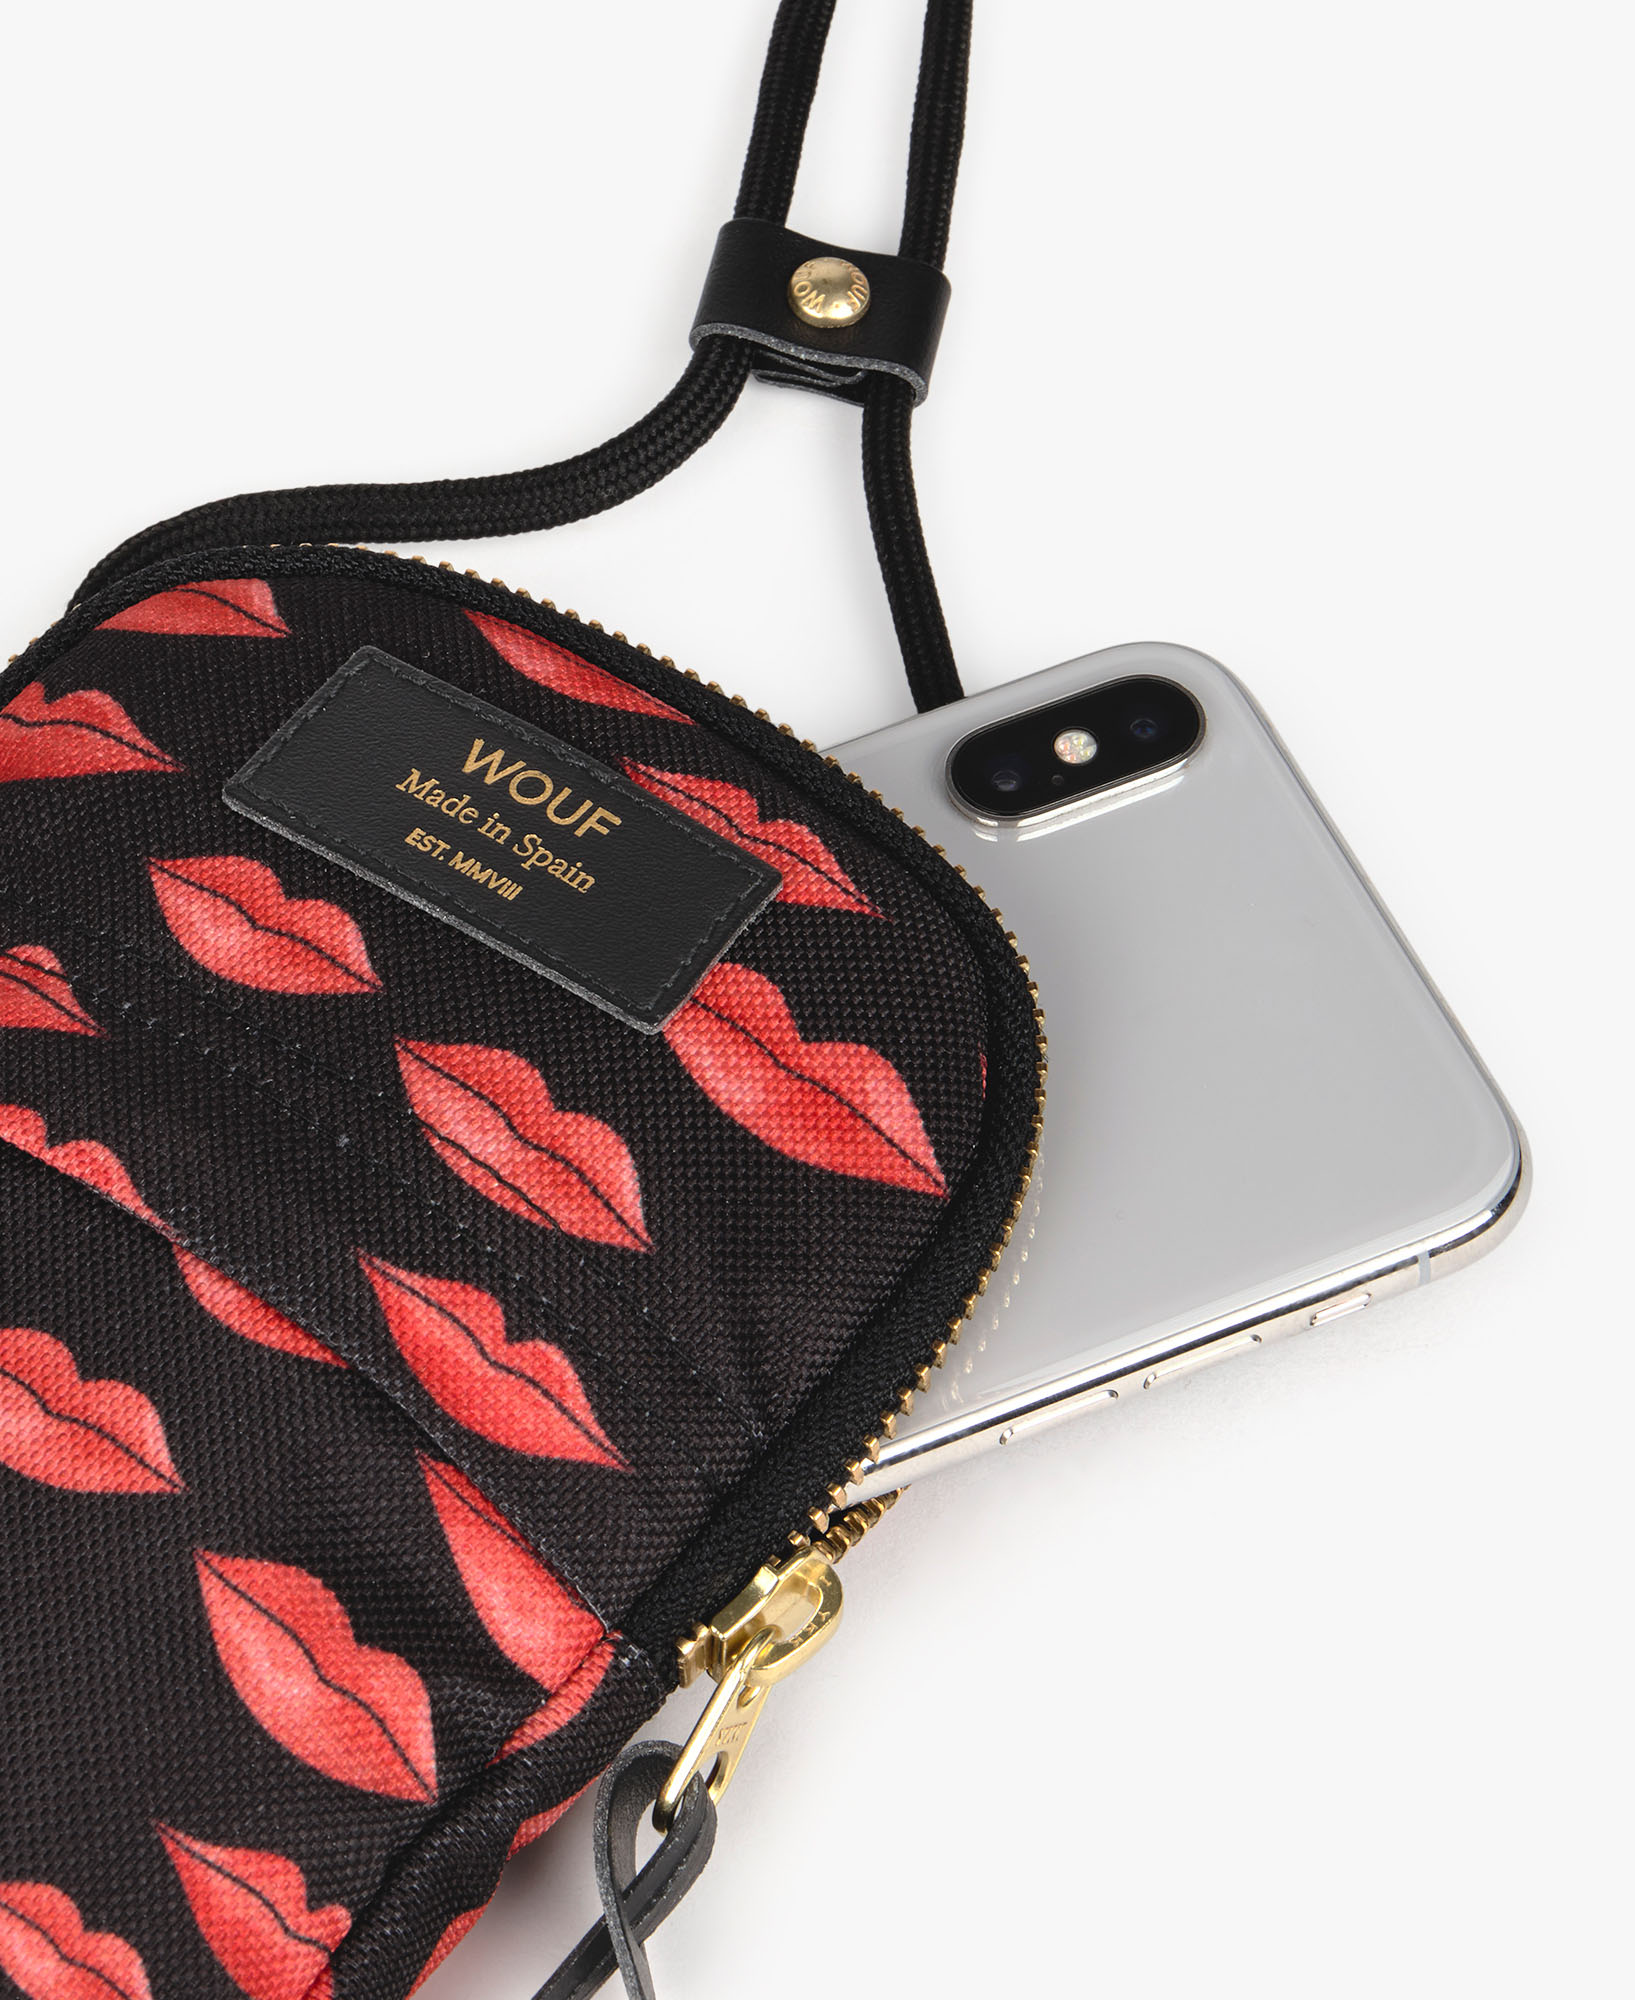 WOUF-Phone-Bag-Beso-Detail